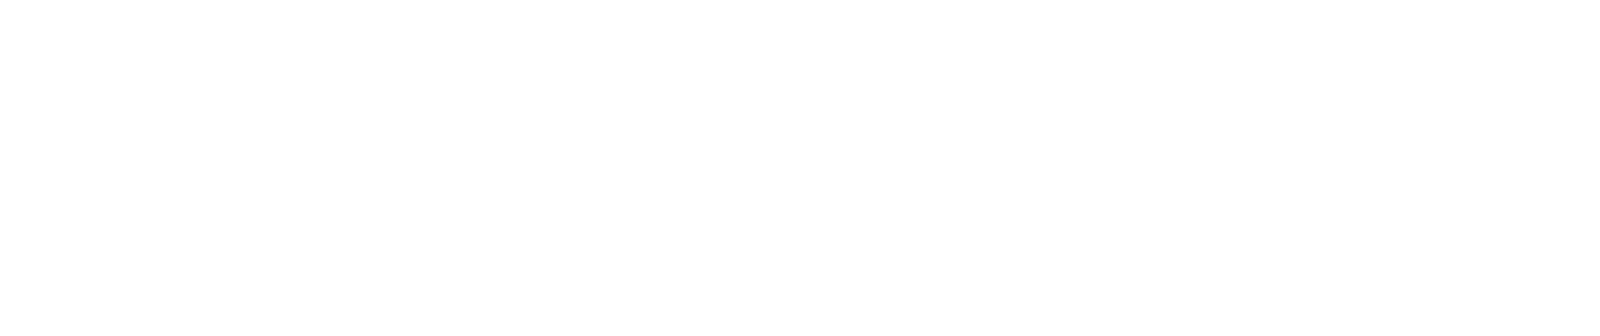 Cushman & Wakefield
 logo large for dark backgrounds (transparent PNG)